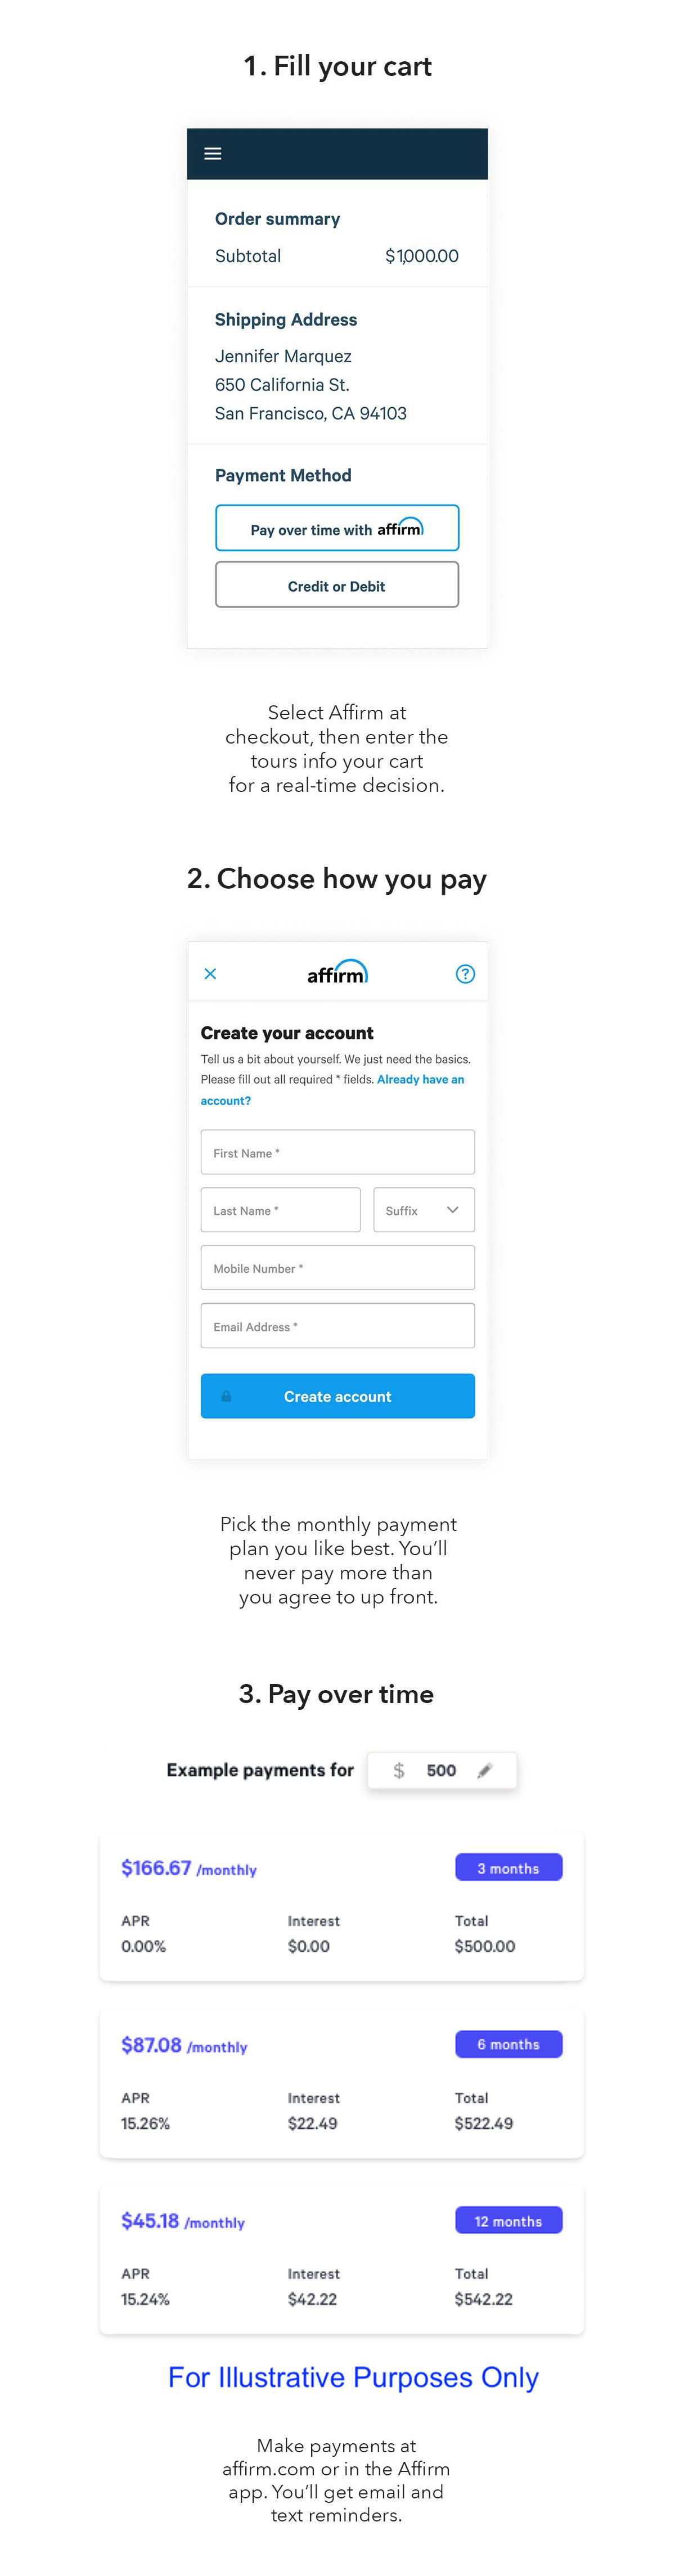 Pay as low as zero percent interest with Affirm